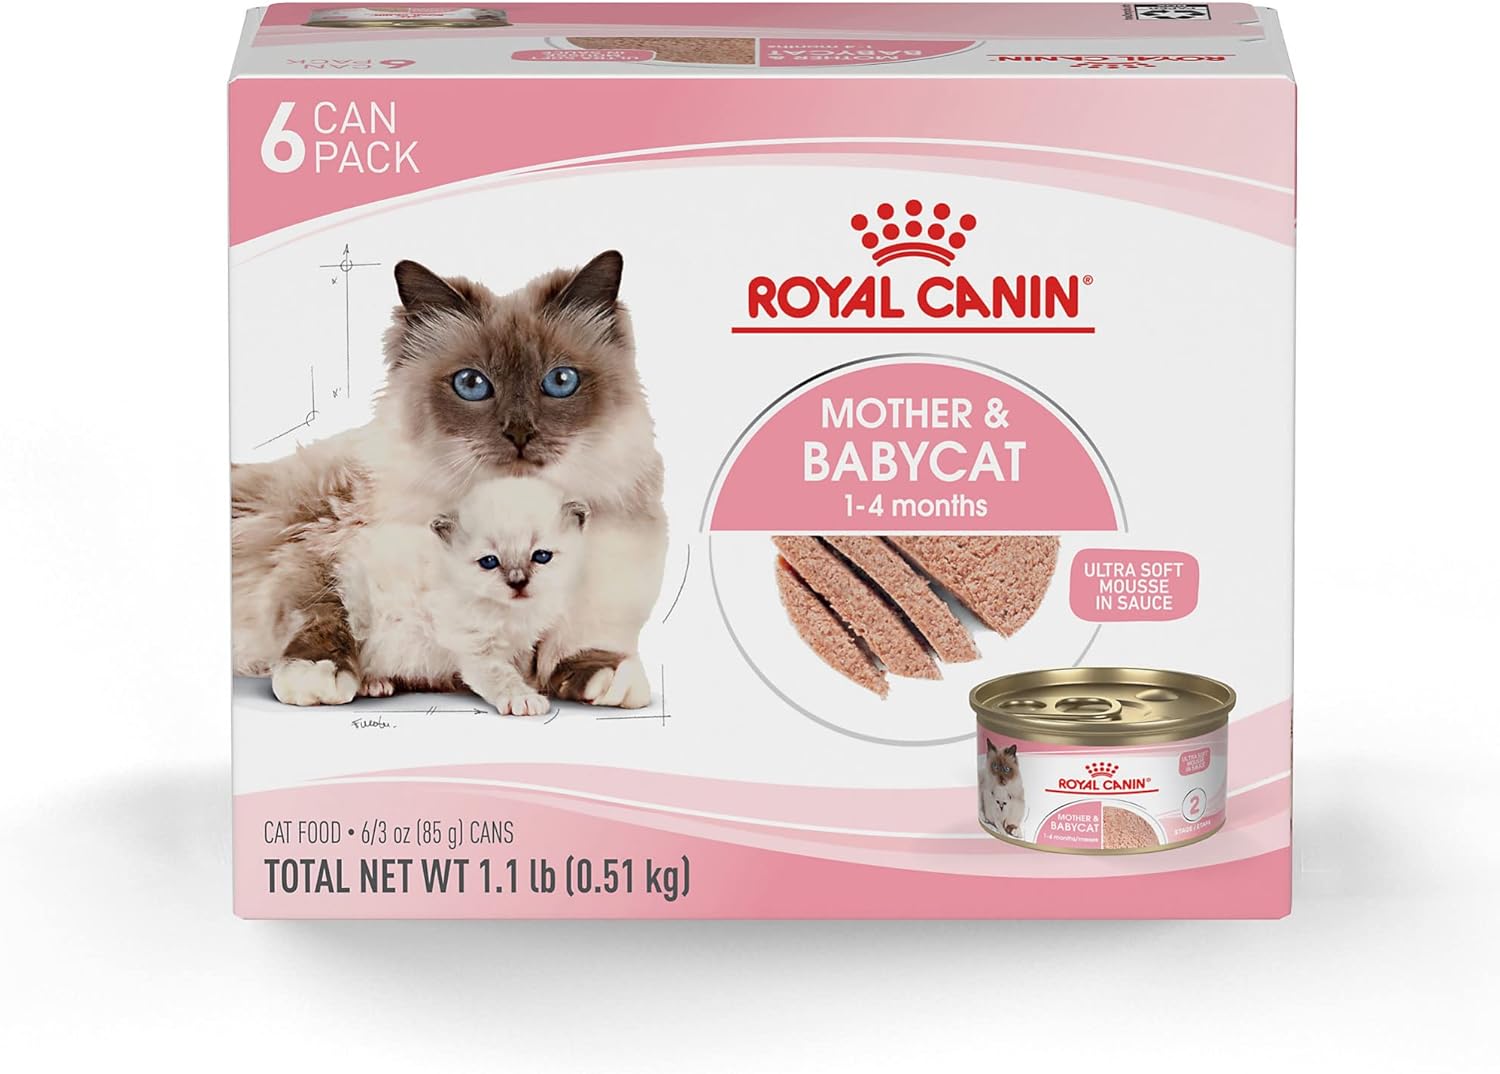 Royal Canin Mother & Babycat Ultra-Soft Mousse in Sauce Wet Cat Food for New Kittens and Nursing Or Pregnant Mother Cats